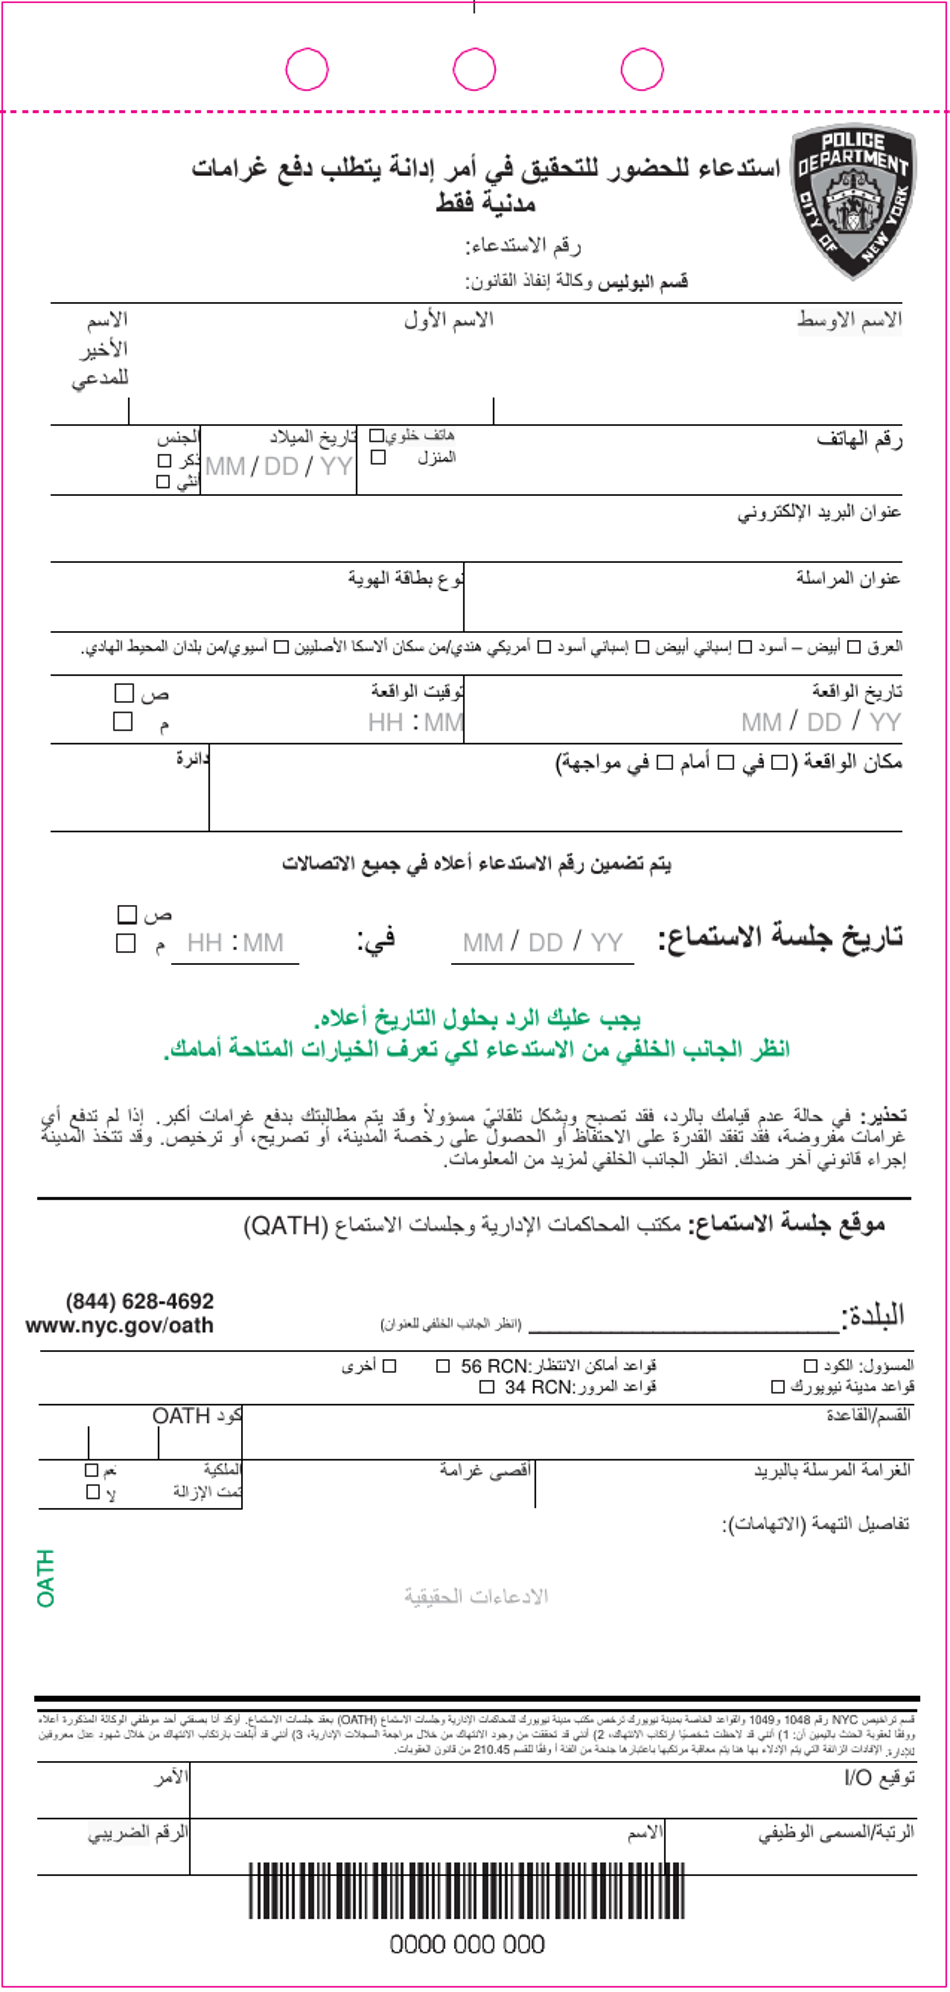 Summons to Appear for Civil Penalties Only - New York City (Arabic), Page 1